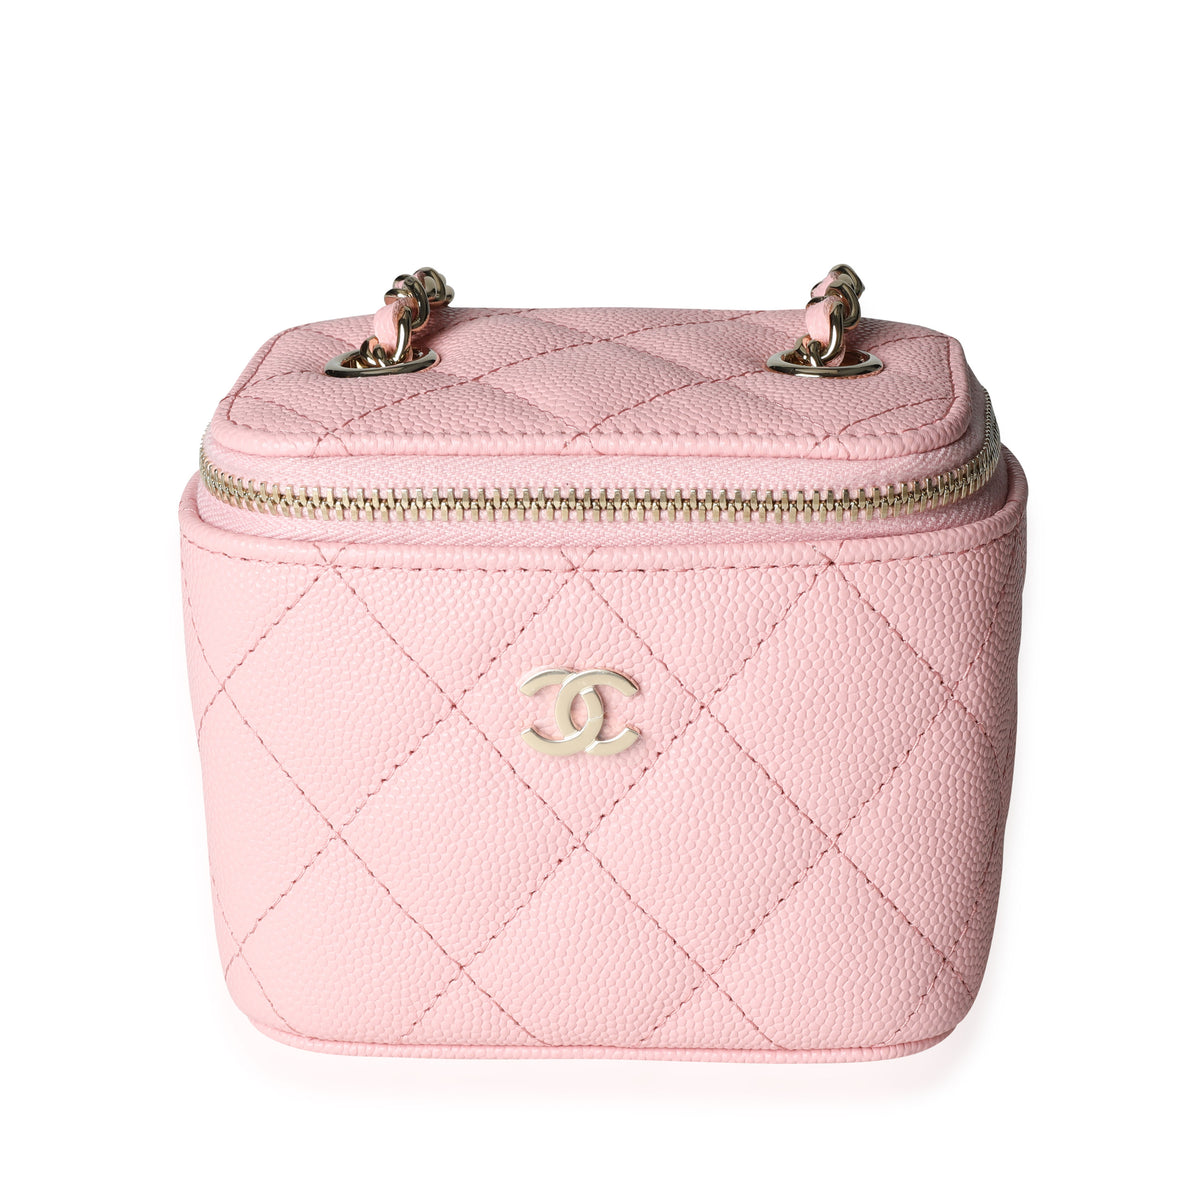 Chanel Small Vanity With Chain Bag In Neon Pink Patent Leather